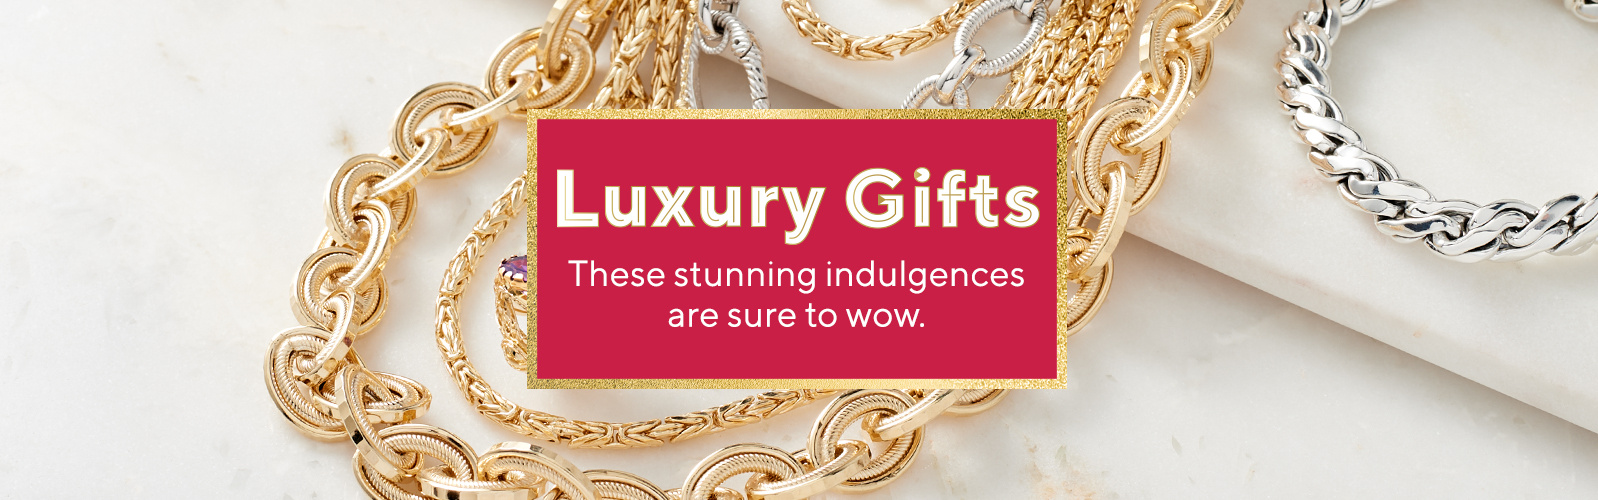 Luxury Gifts  These stunning indulgences are sure to wow.